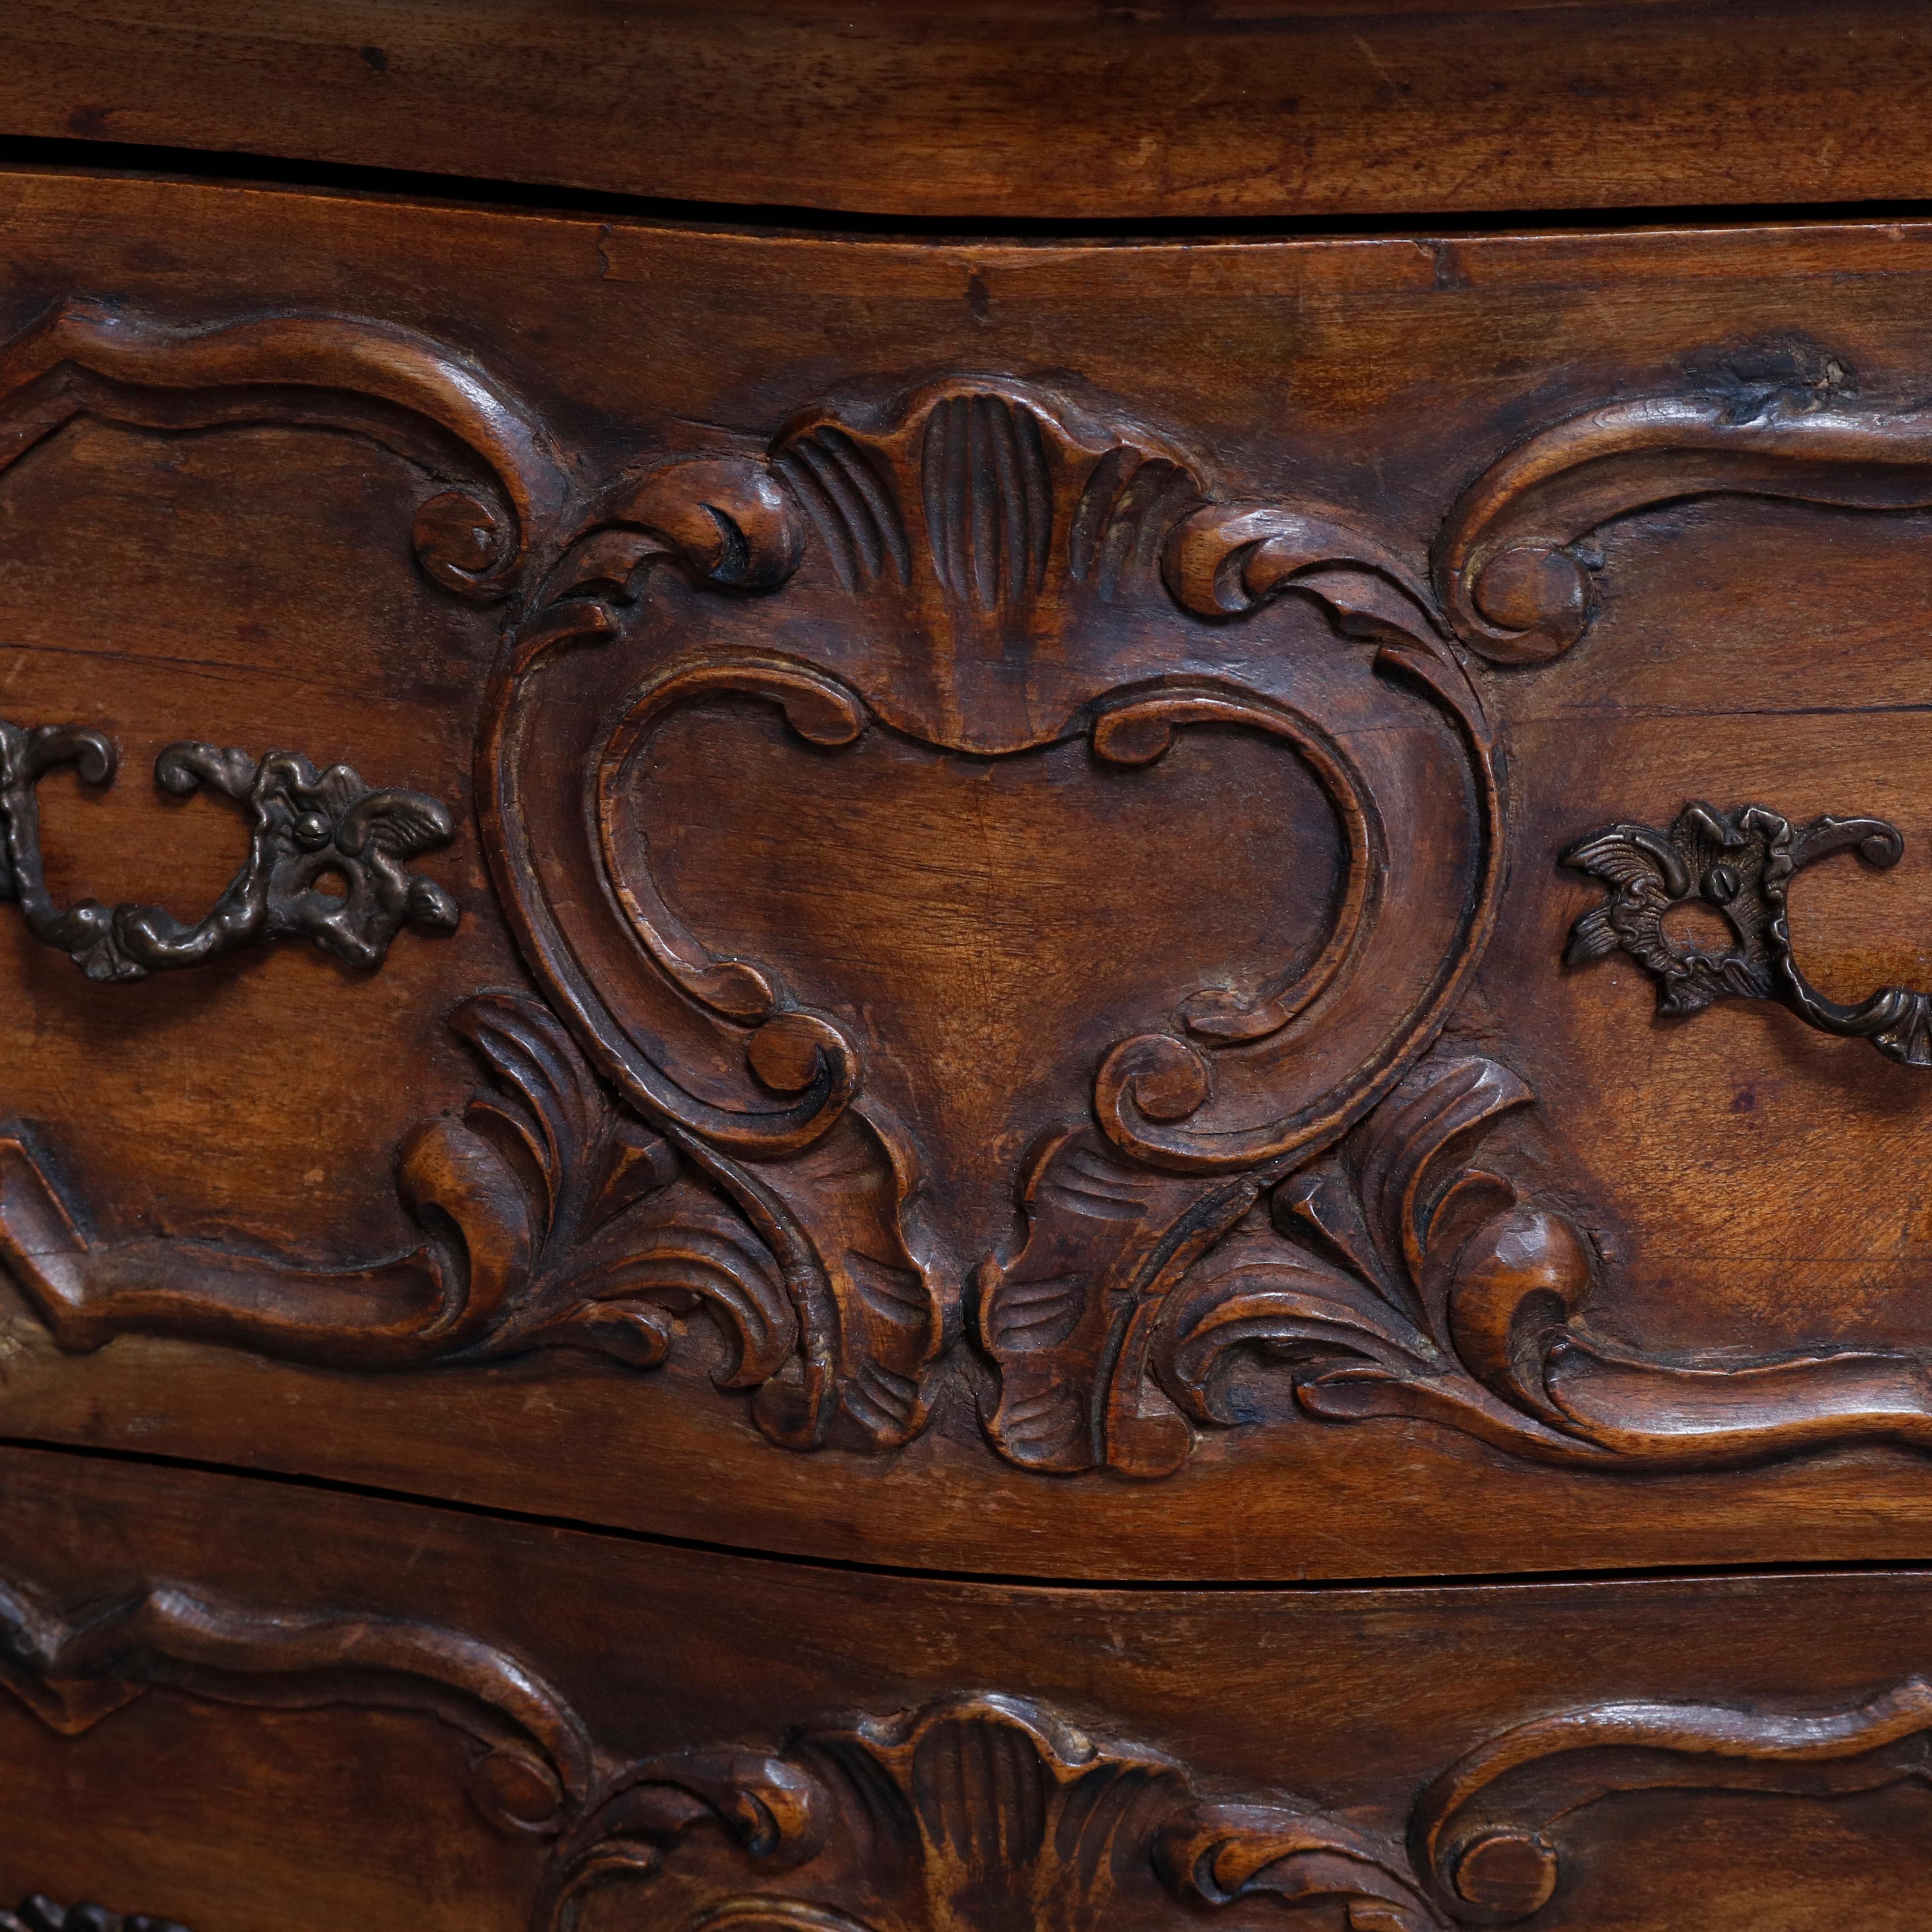 An Italian Rococo style chest offers walnut construction in bombe form with two drawers having carved scroll and foliate design surmounting pierced scroll and gadroon apron raised on cabriole legs, 20th century

***DELIVERY NOTICE – Due to COVID-19